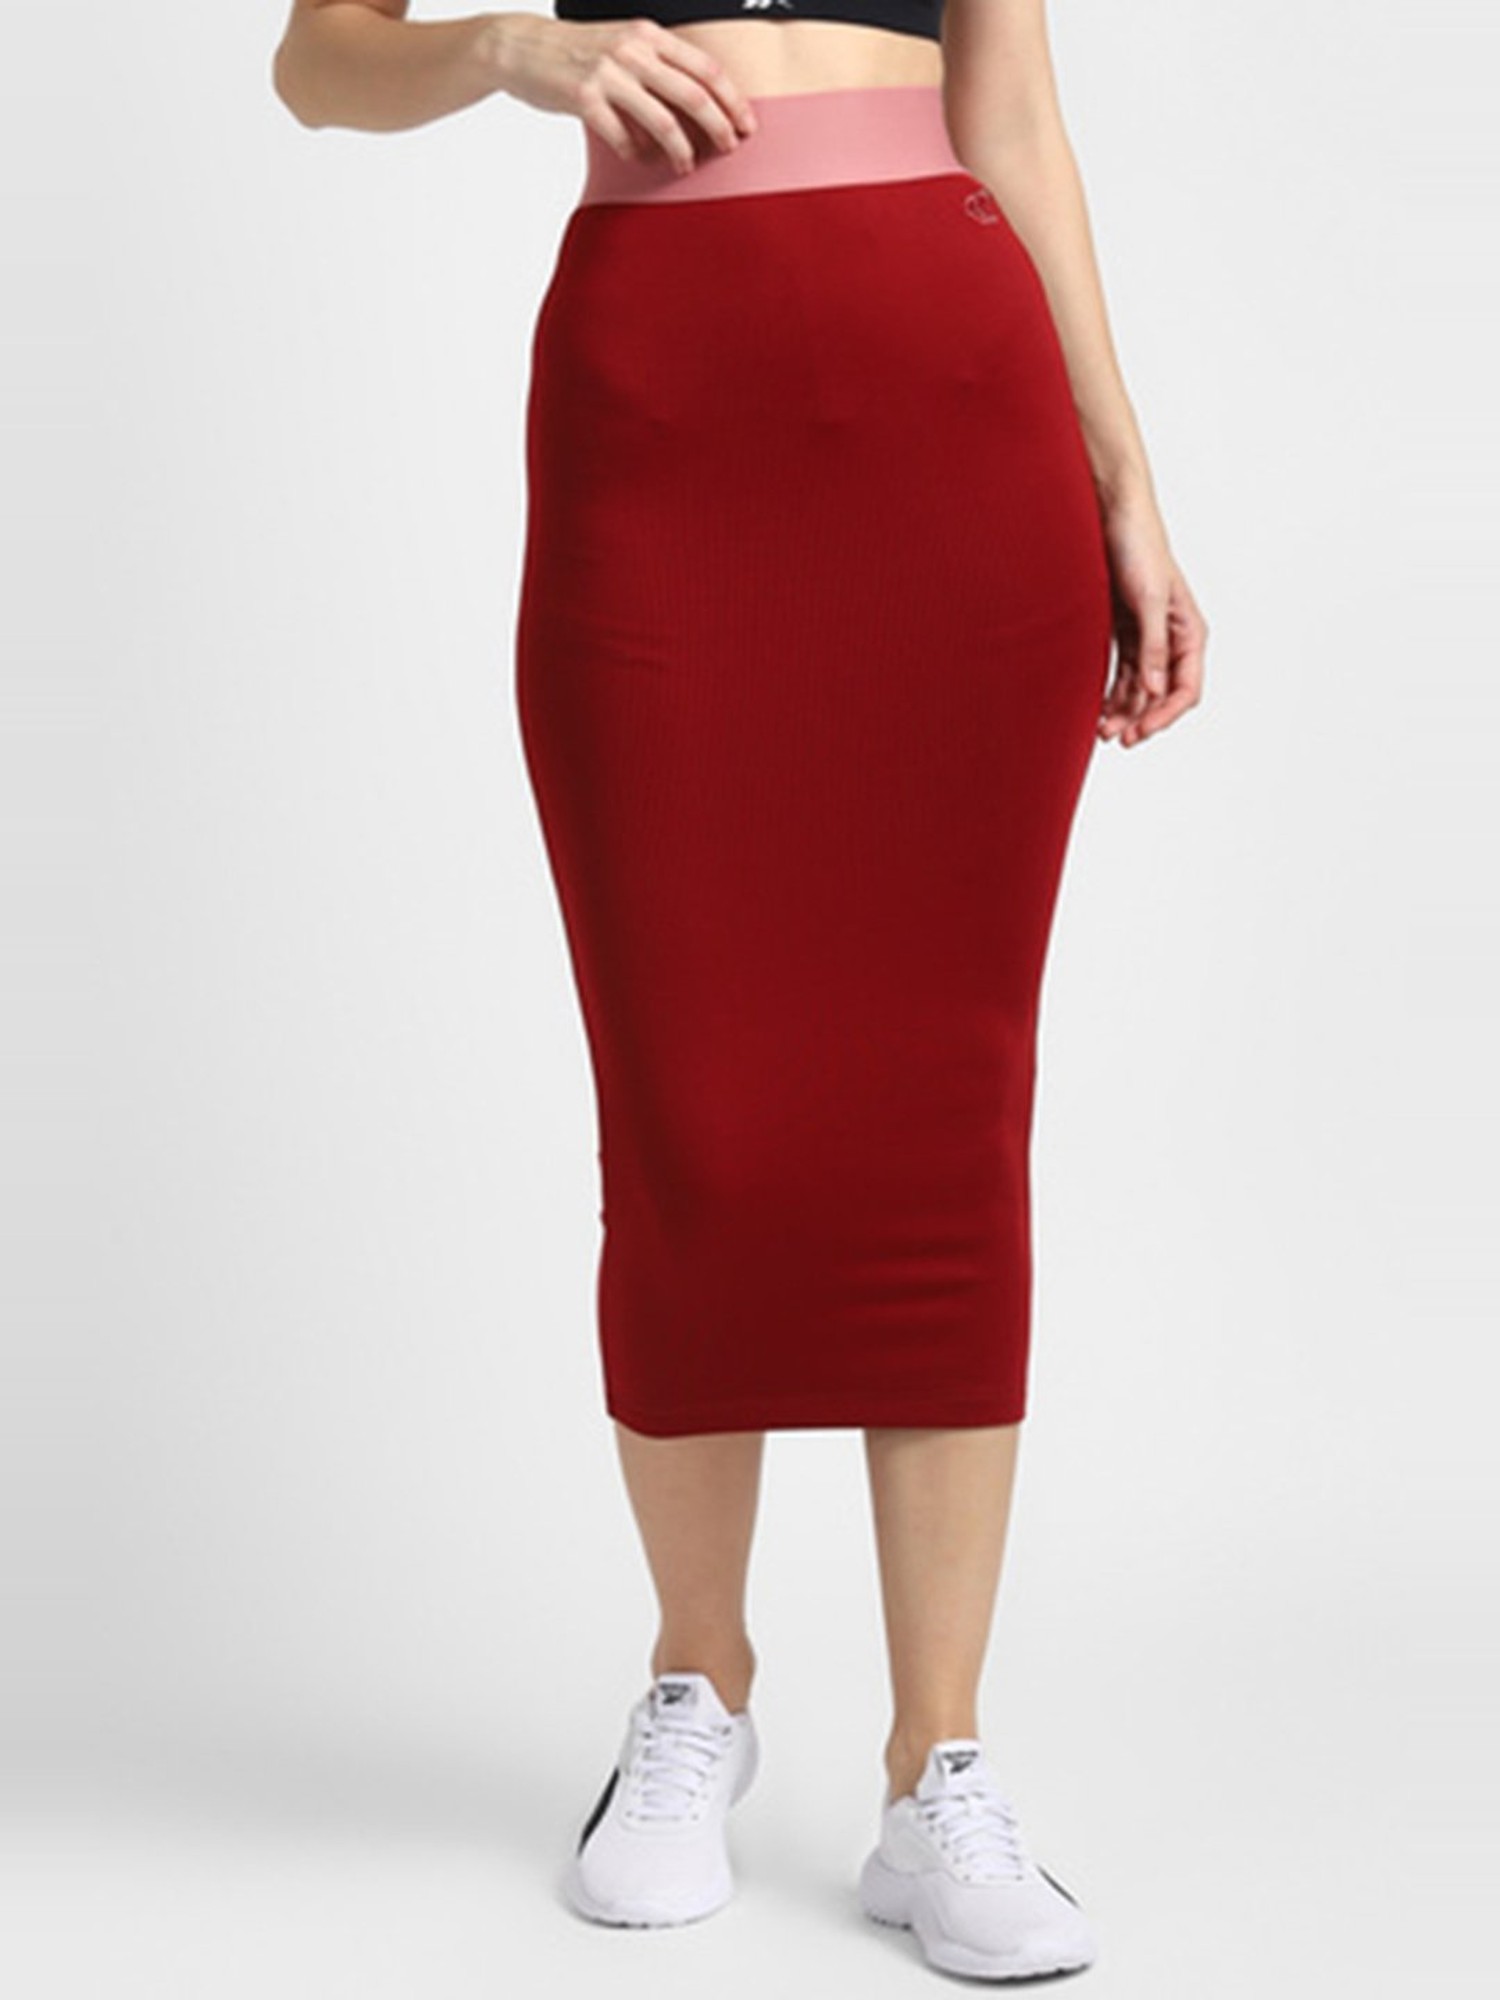 Style Tips How to Wear a Pencil Skirt Like a Red Carpet Stunner